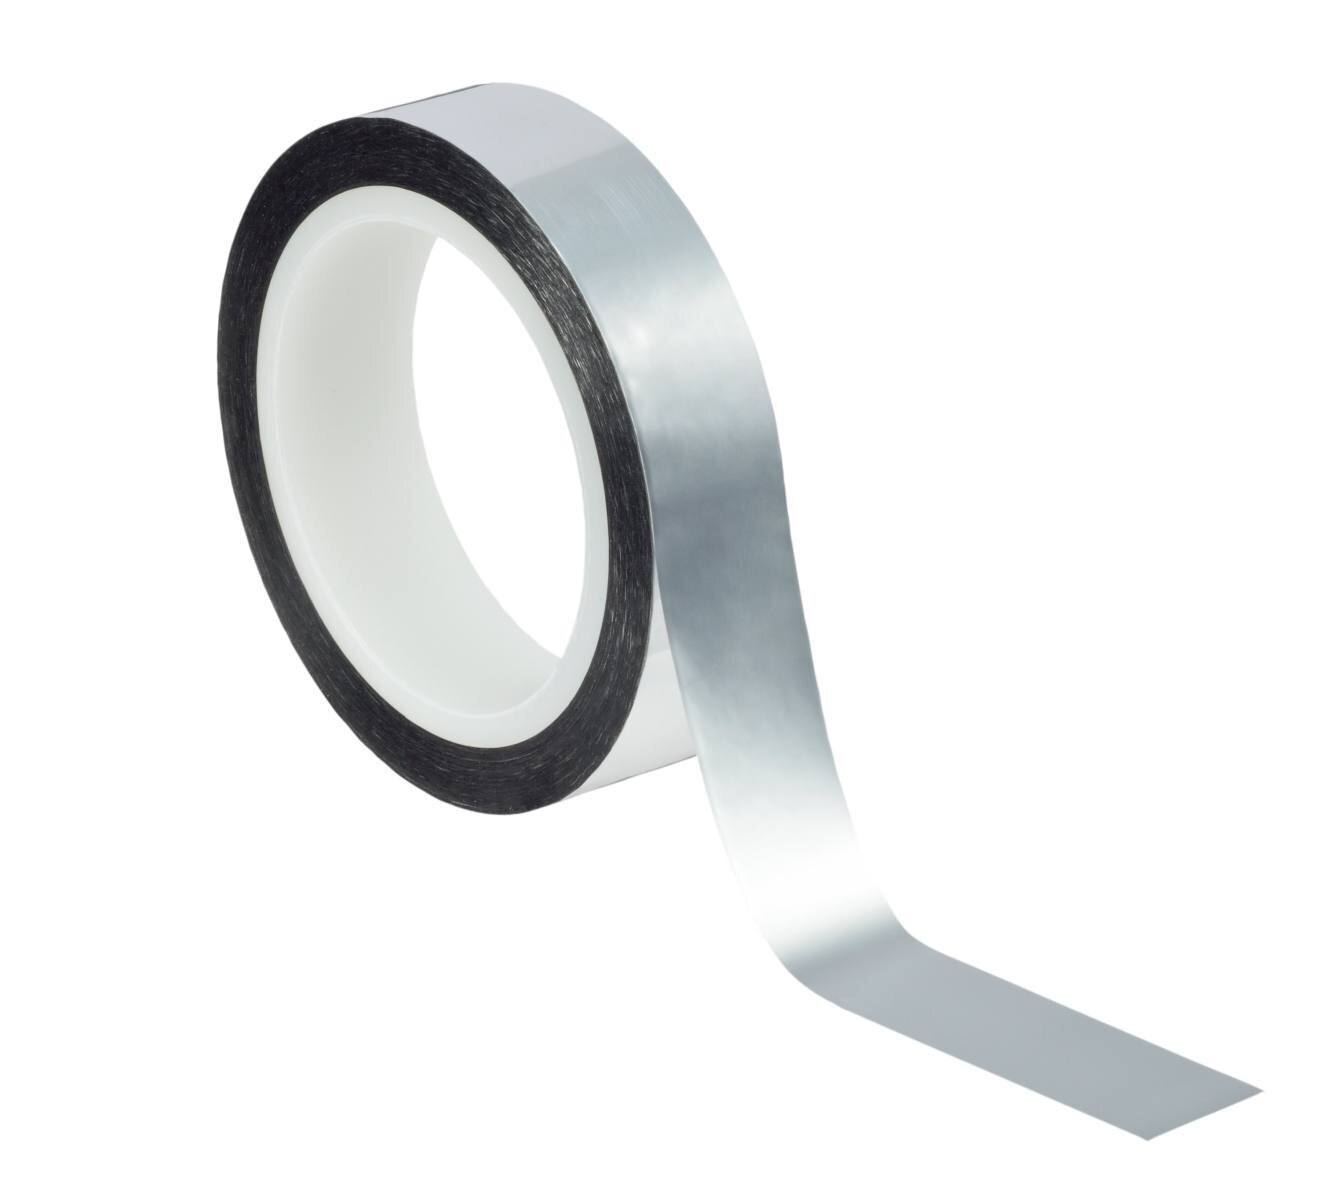 3M polyester adhesive tape 850 S, silver, 19 mm x 66 m, 0.05 mm